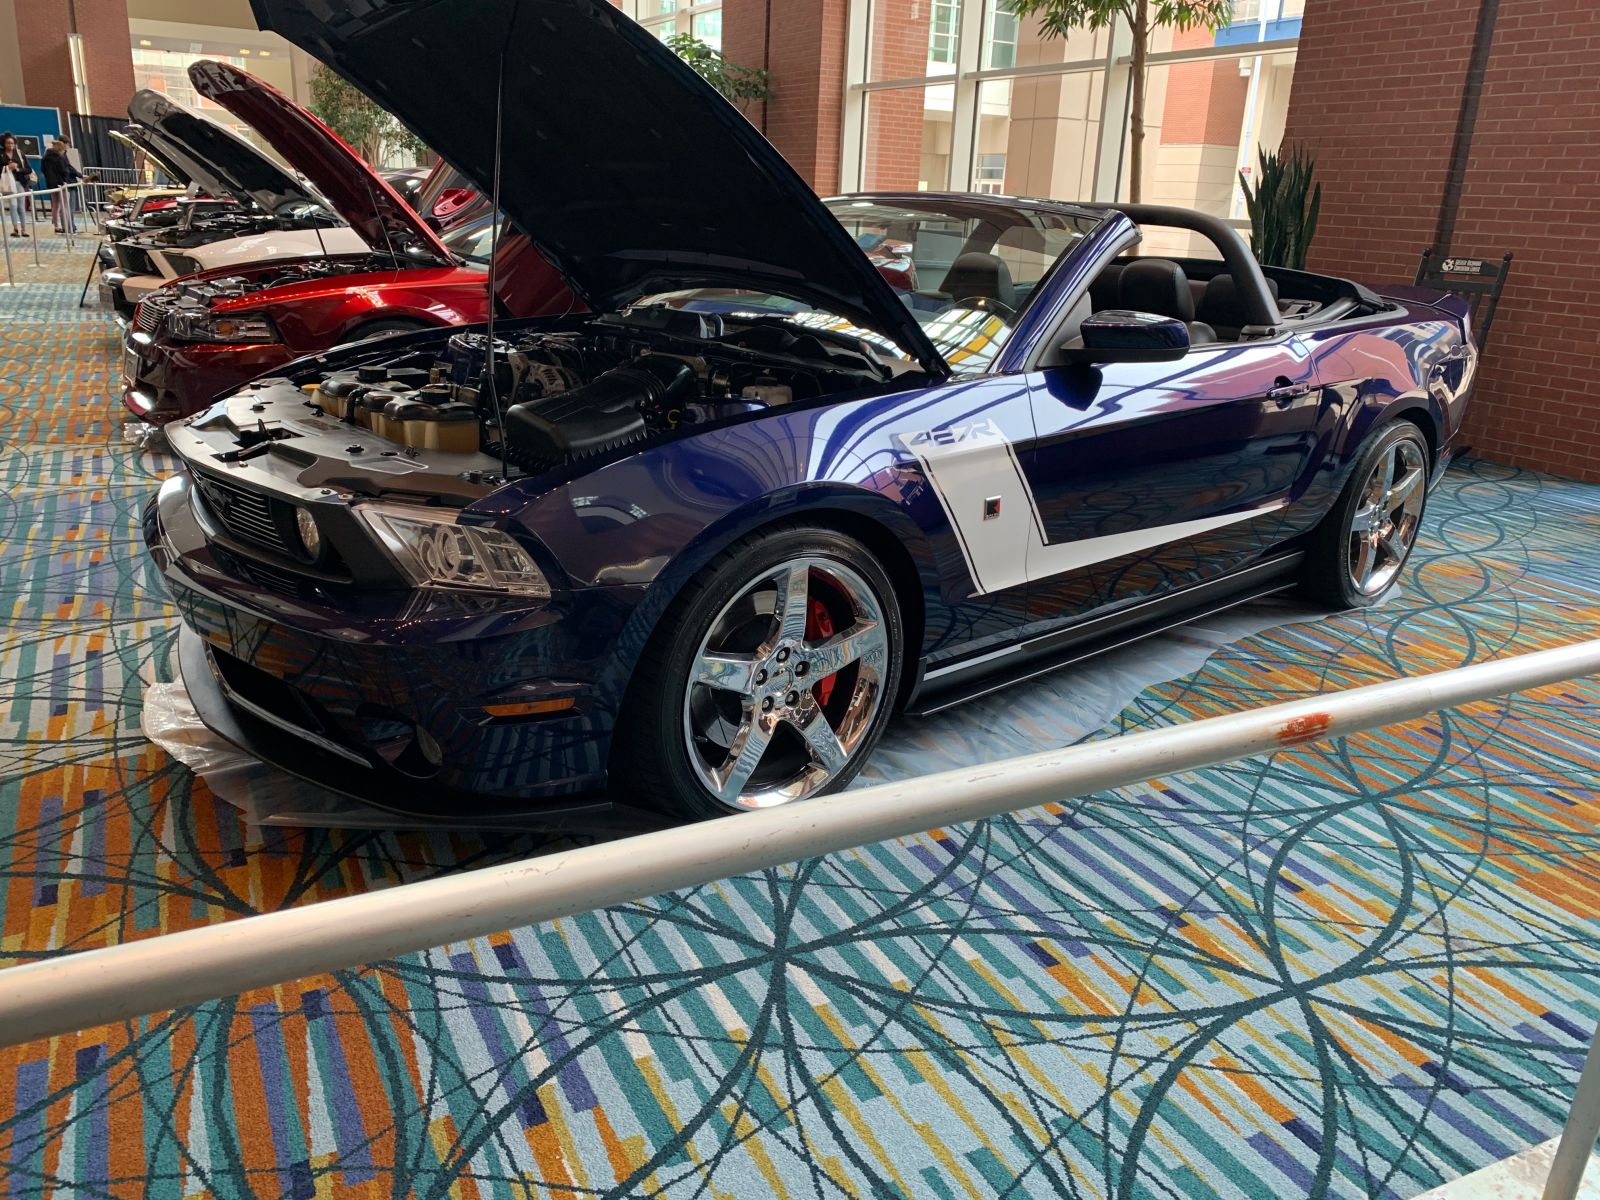 A Mustang display in the lobby